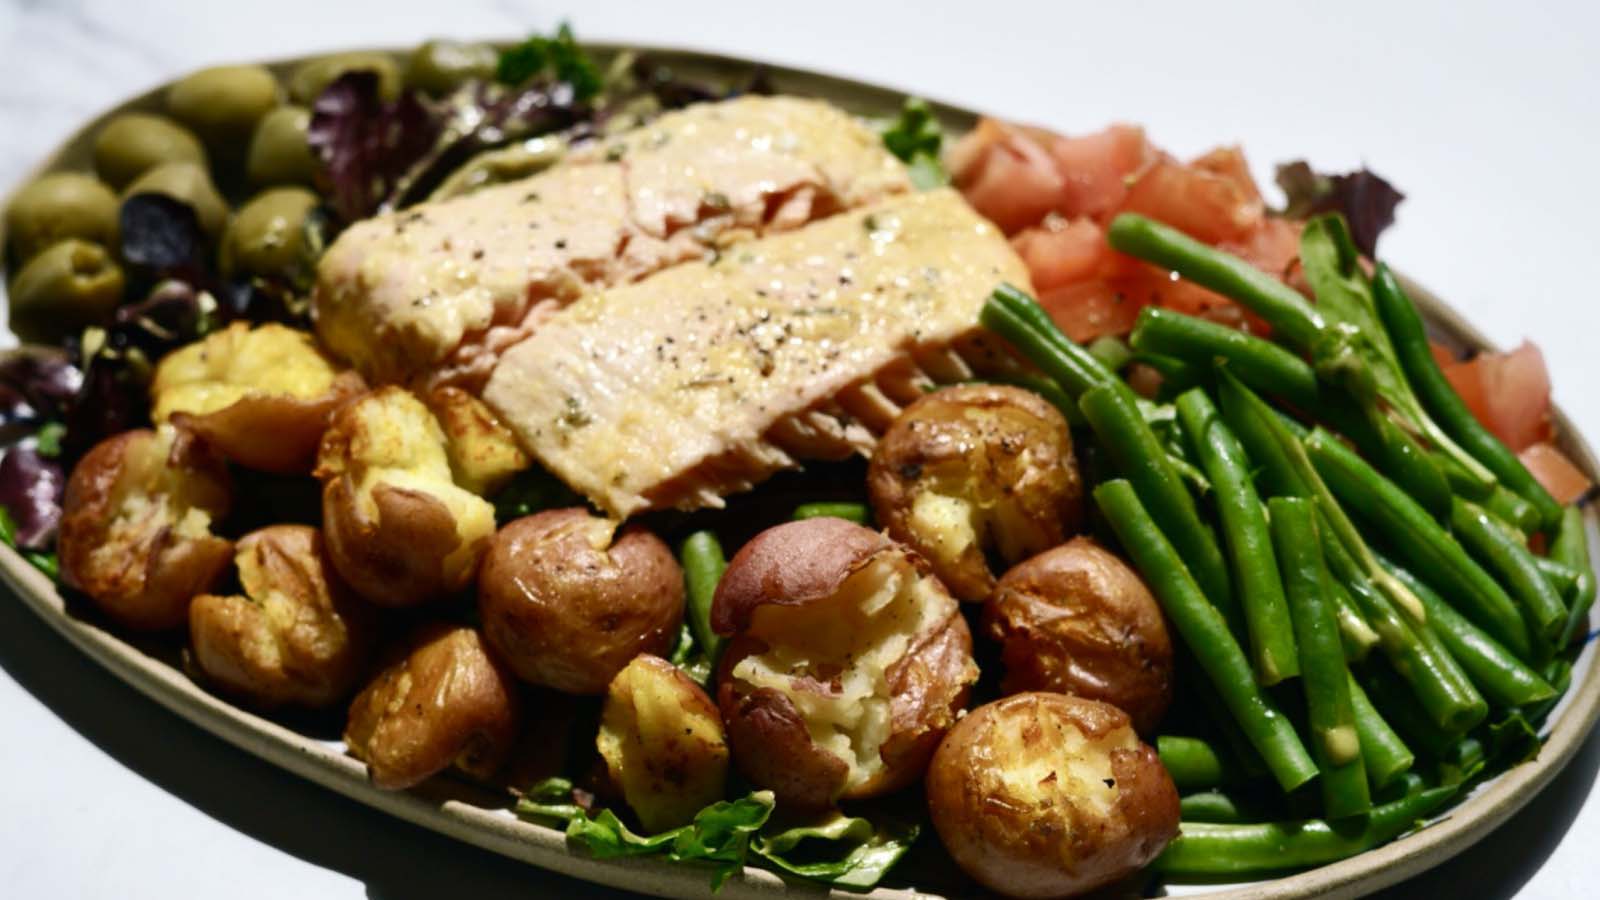 Gourmend recipe for low fodmap salon nicoise salad with roasted smashed potatoes & turmeric dressing